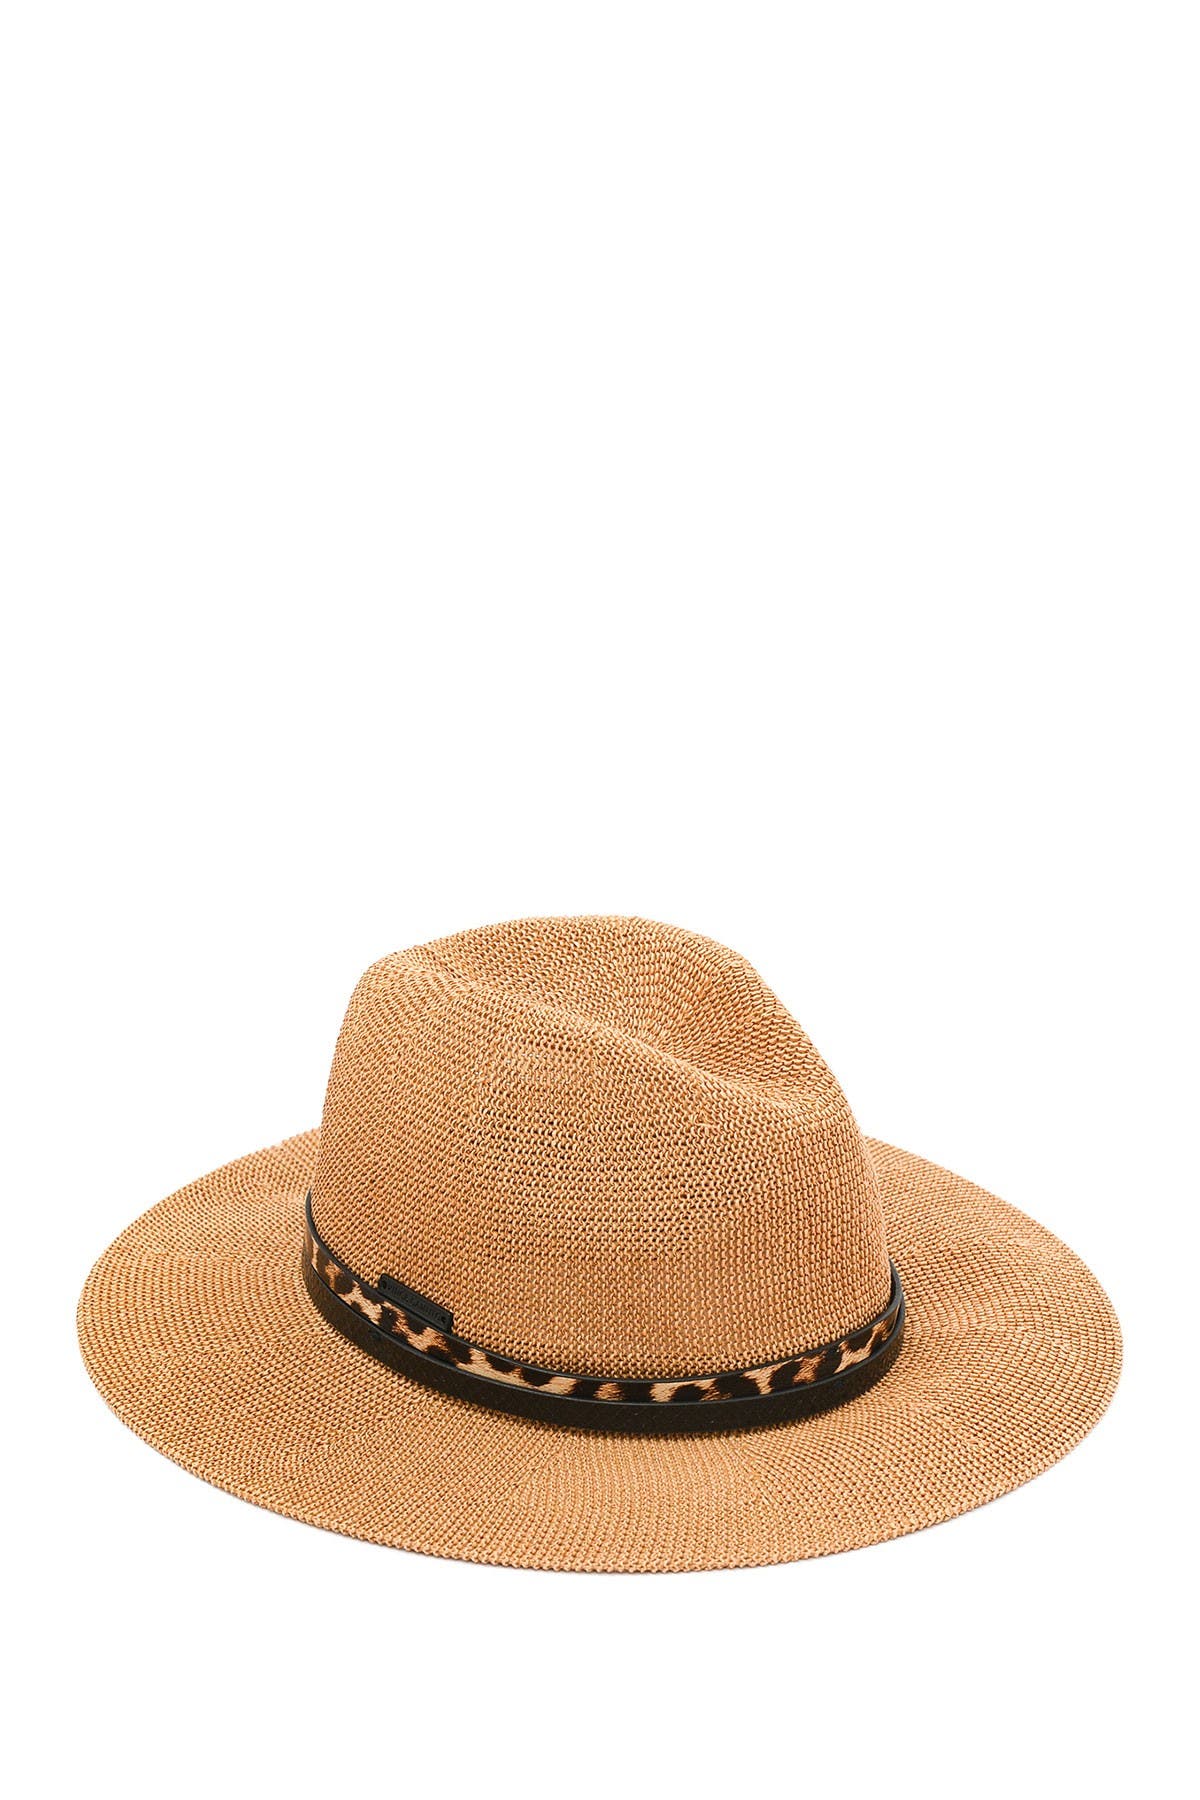 Vince Camuto Mix Media Band Panama Hat In Tan